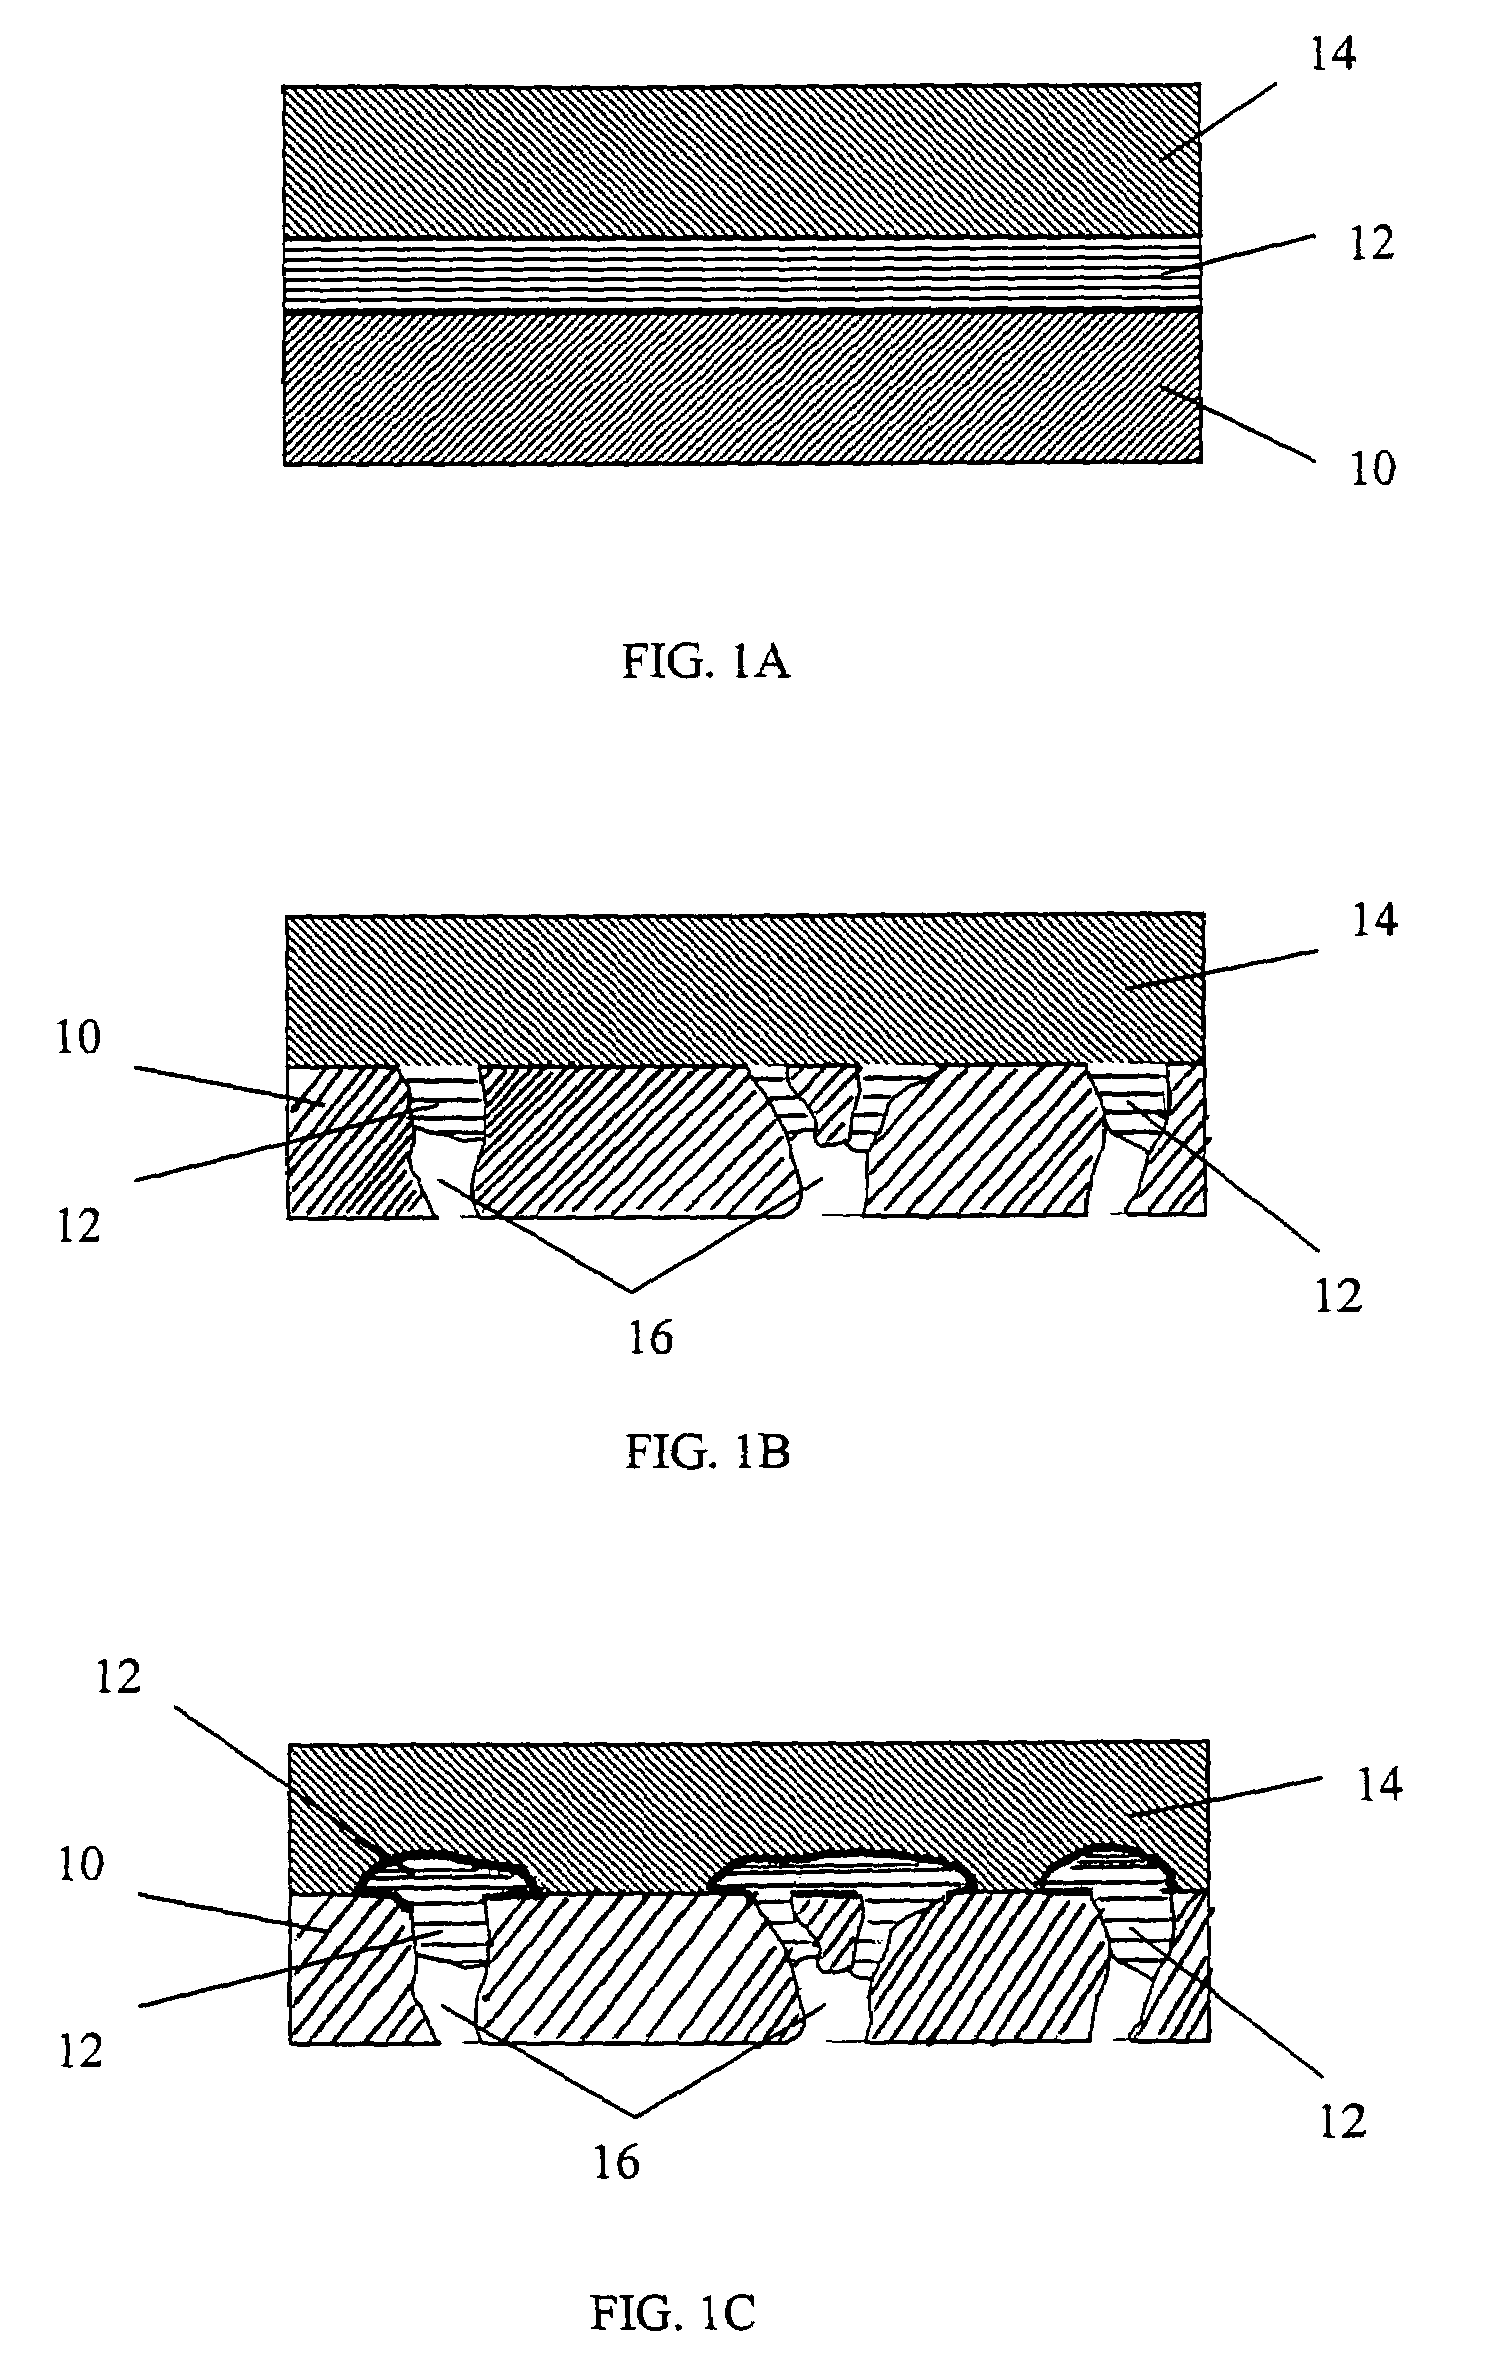 Method for fabricating a composite gas separation module